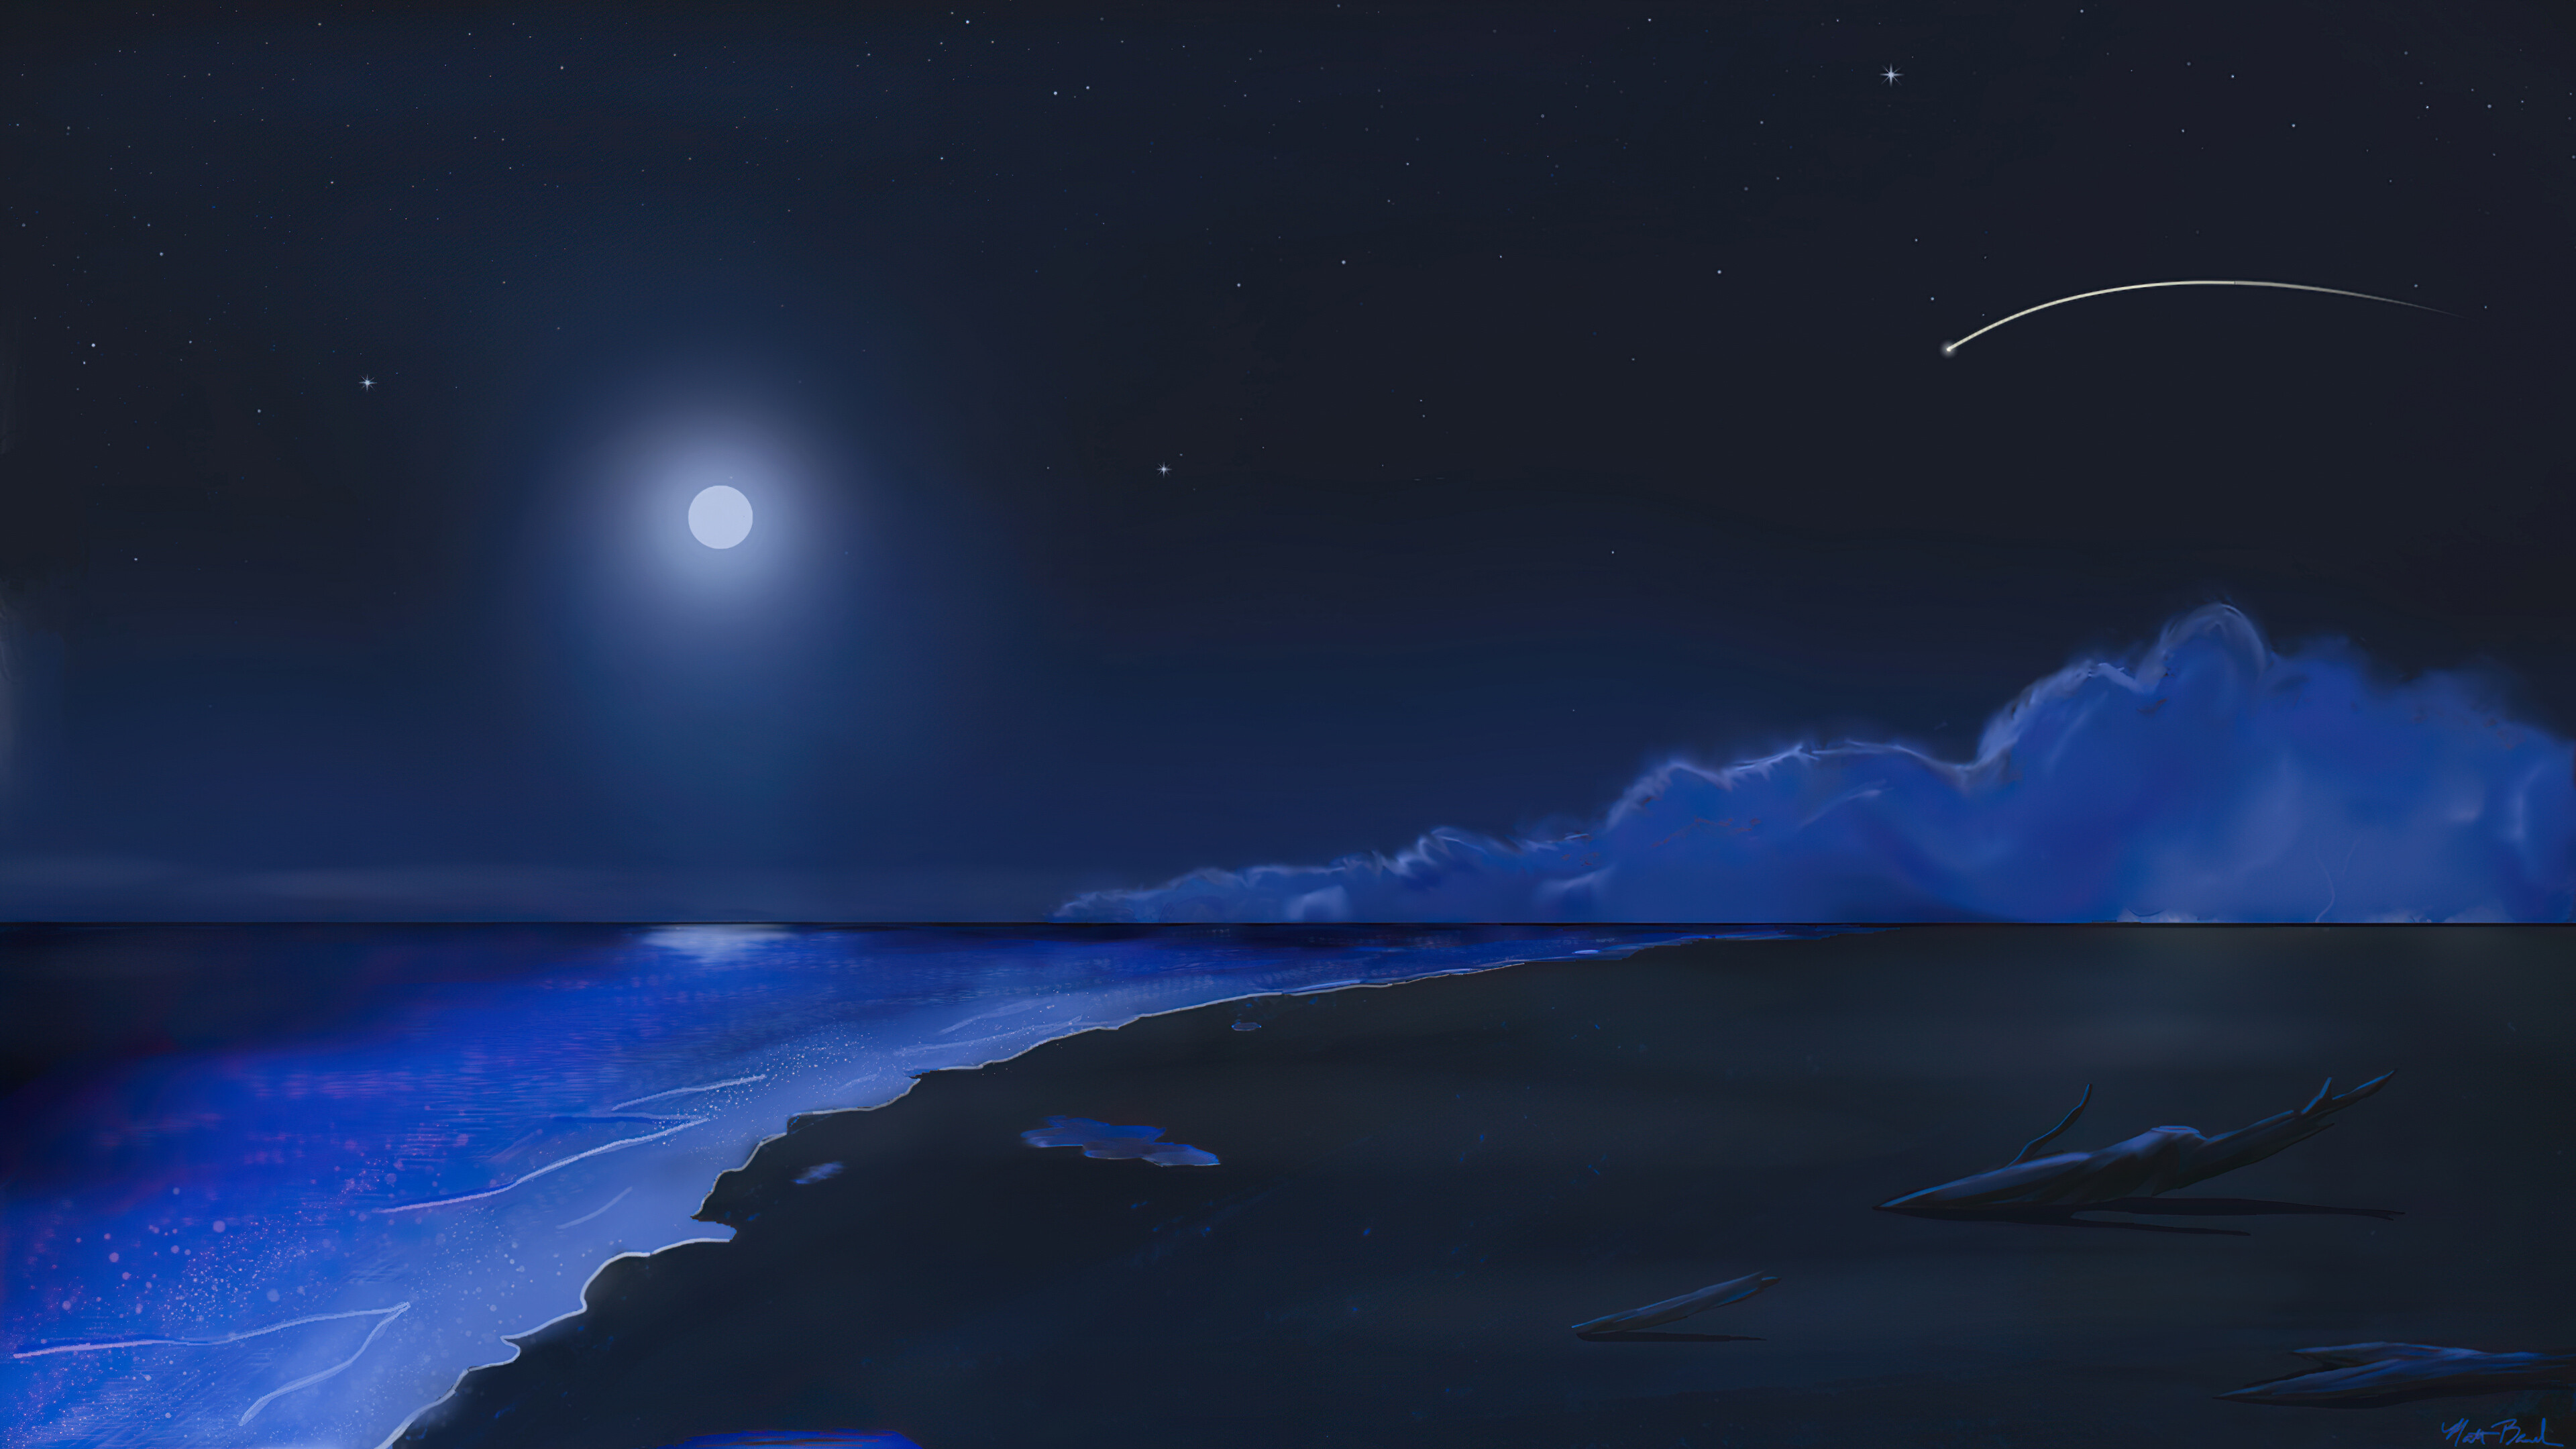 Moonlight: Nighttime, The reflection of the sun off the moon's surface, Beach. 3840x2160 4K Wallpaper.